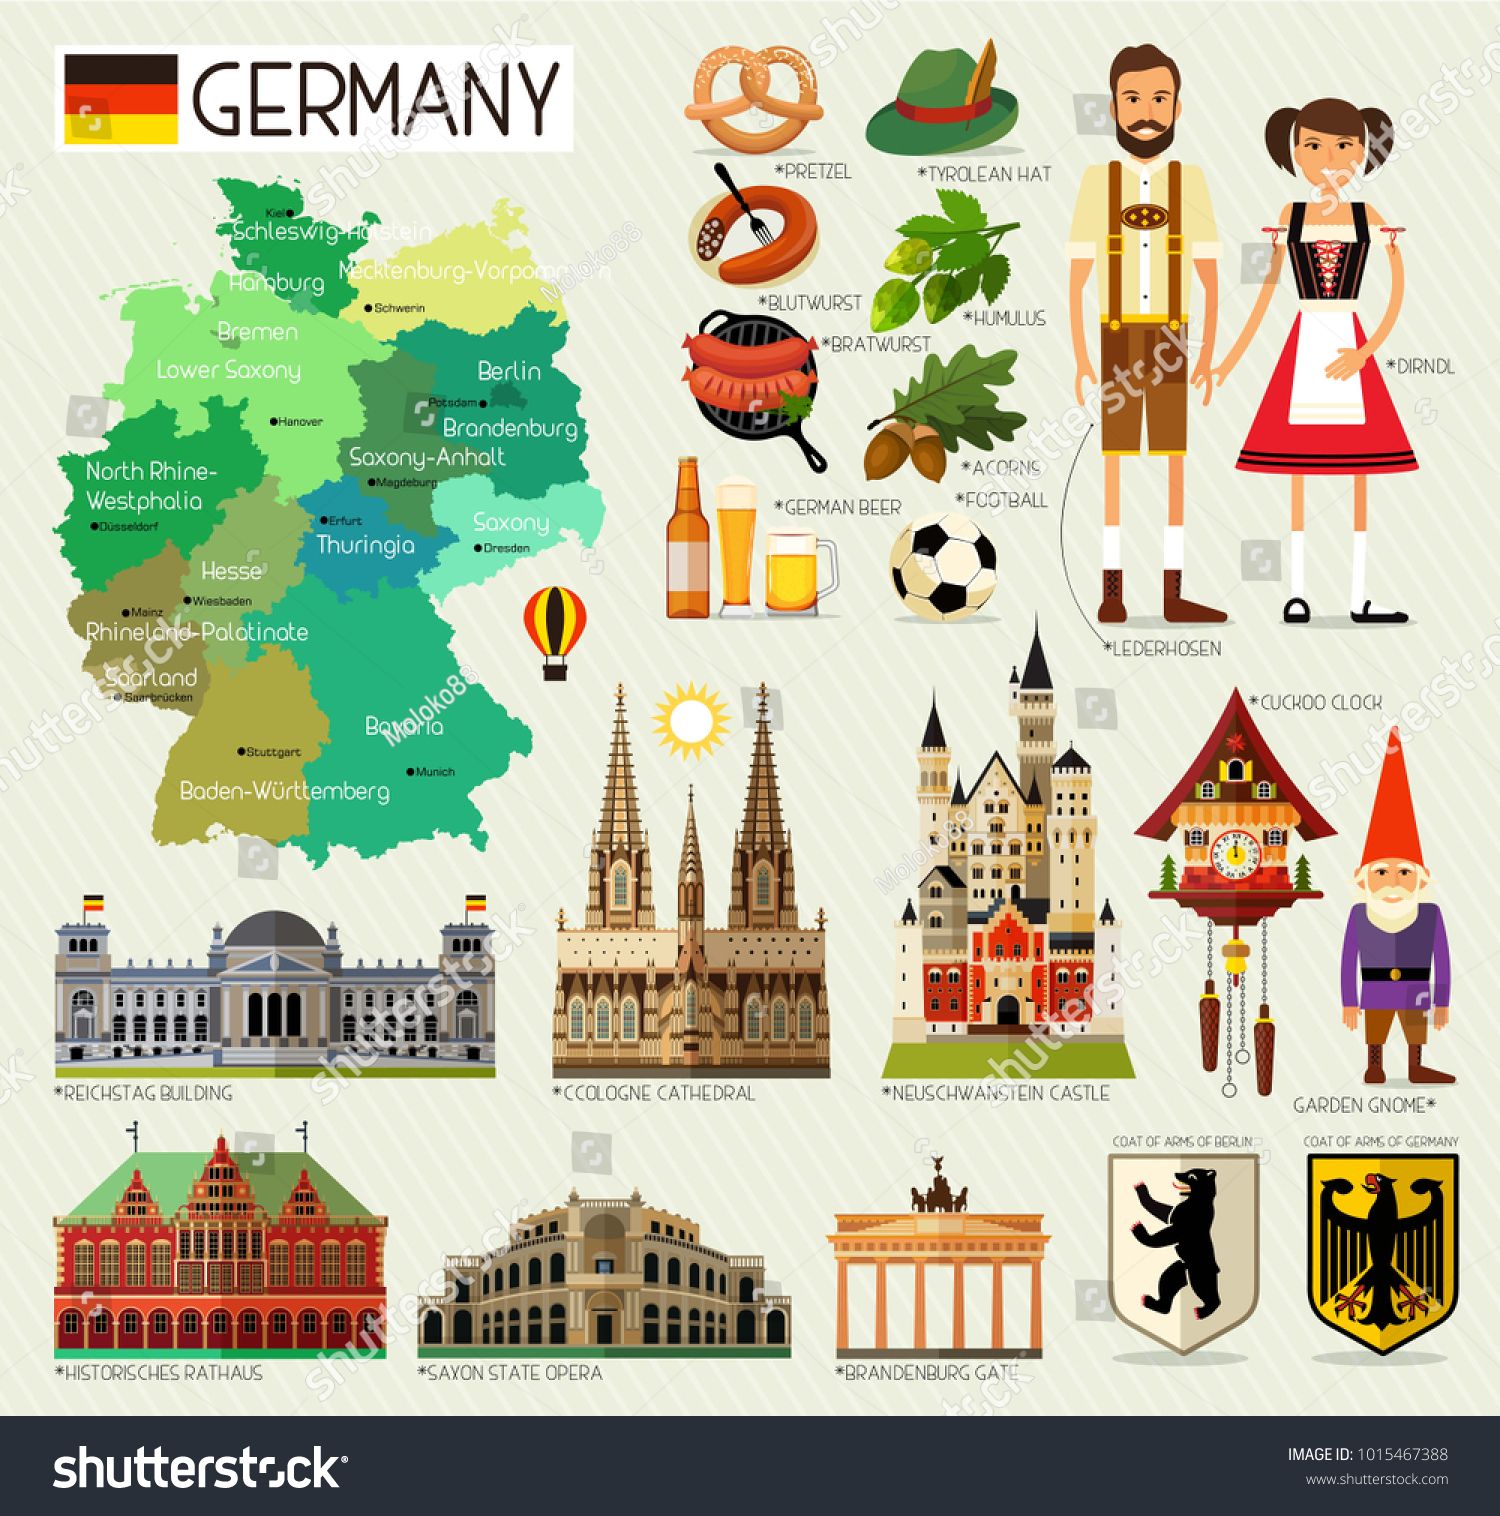 Germany clipart travel germany. Map of and icons